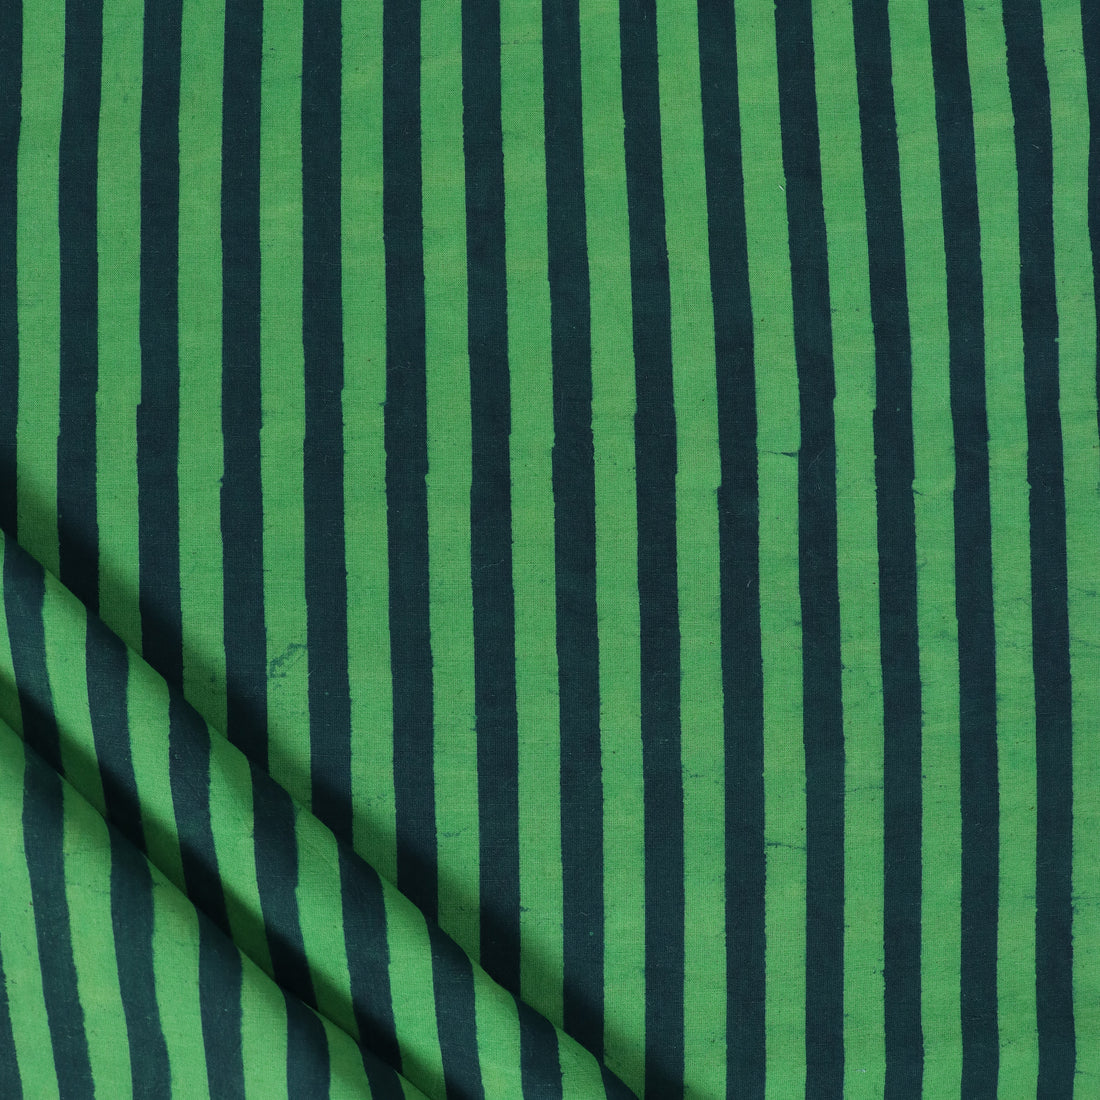 Green Stripes Printed Cotton Running Fabric Online